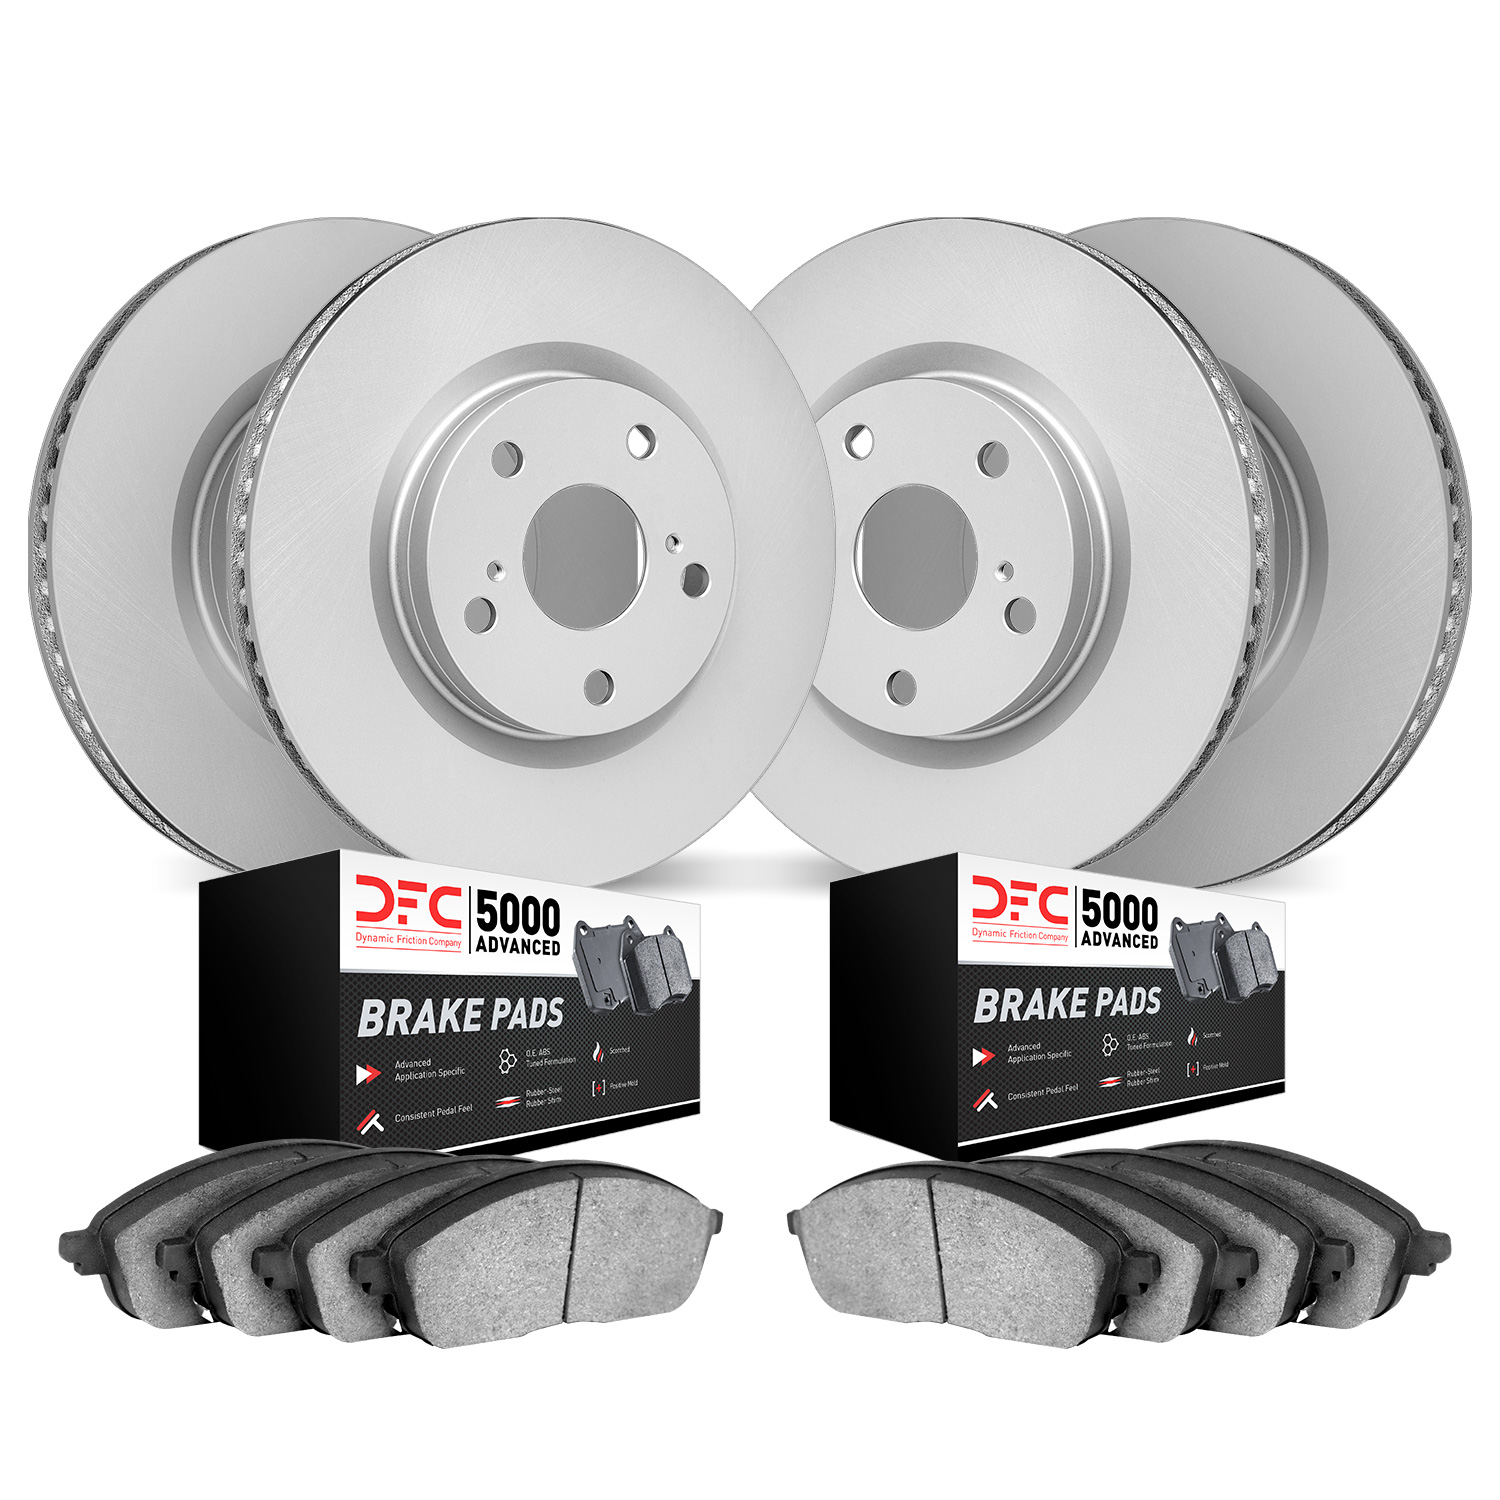 4504-54041 Geospec Brake Rotors w/5000 Advanced Brake Pads Kit, 2004-2007 Ford/Lincoln/Mercury/Mazda, Position: Front and Rear